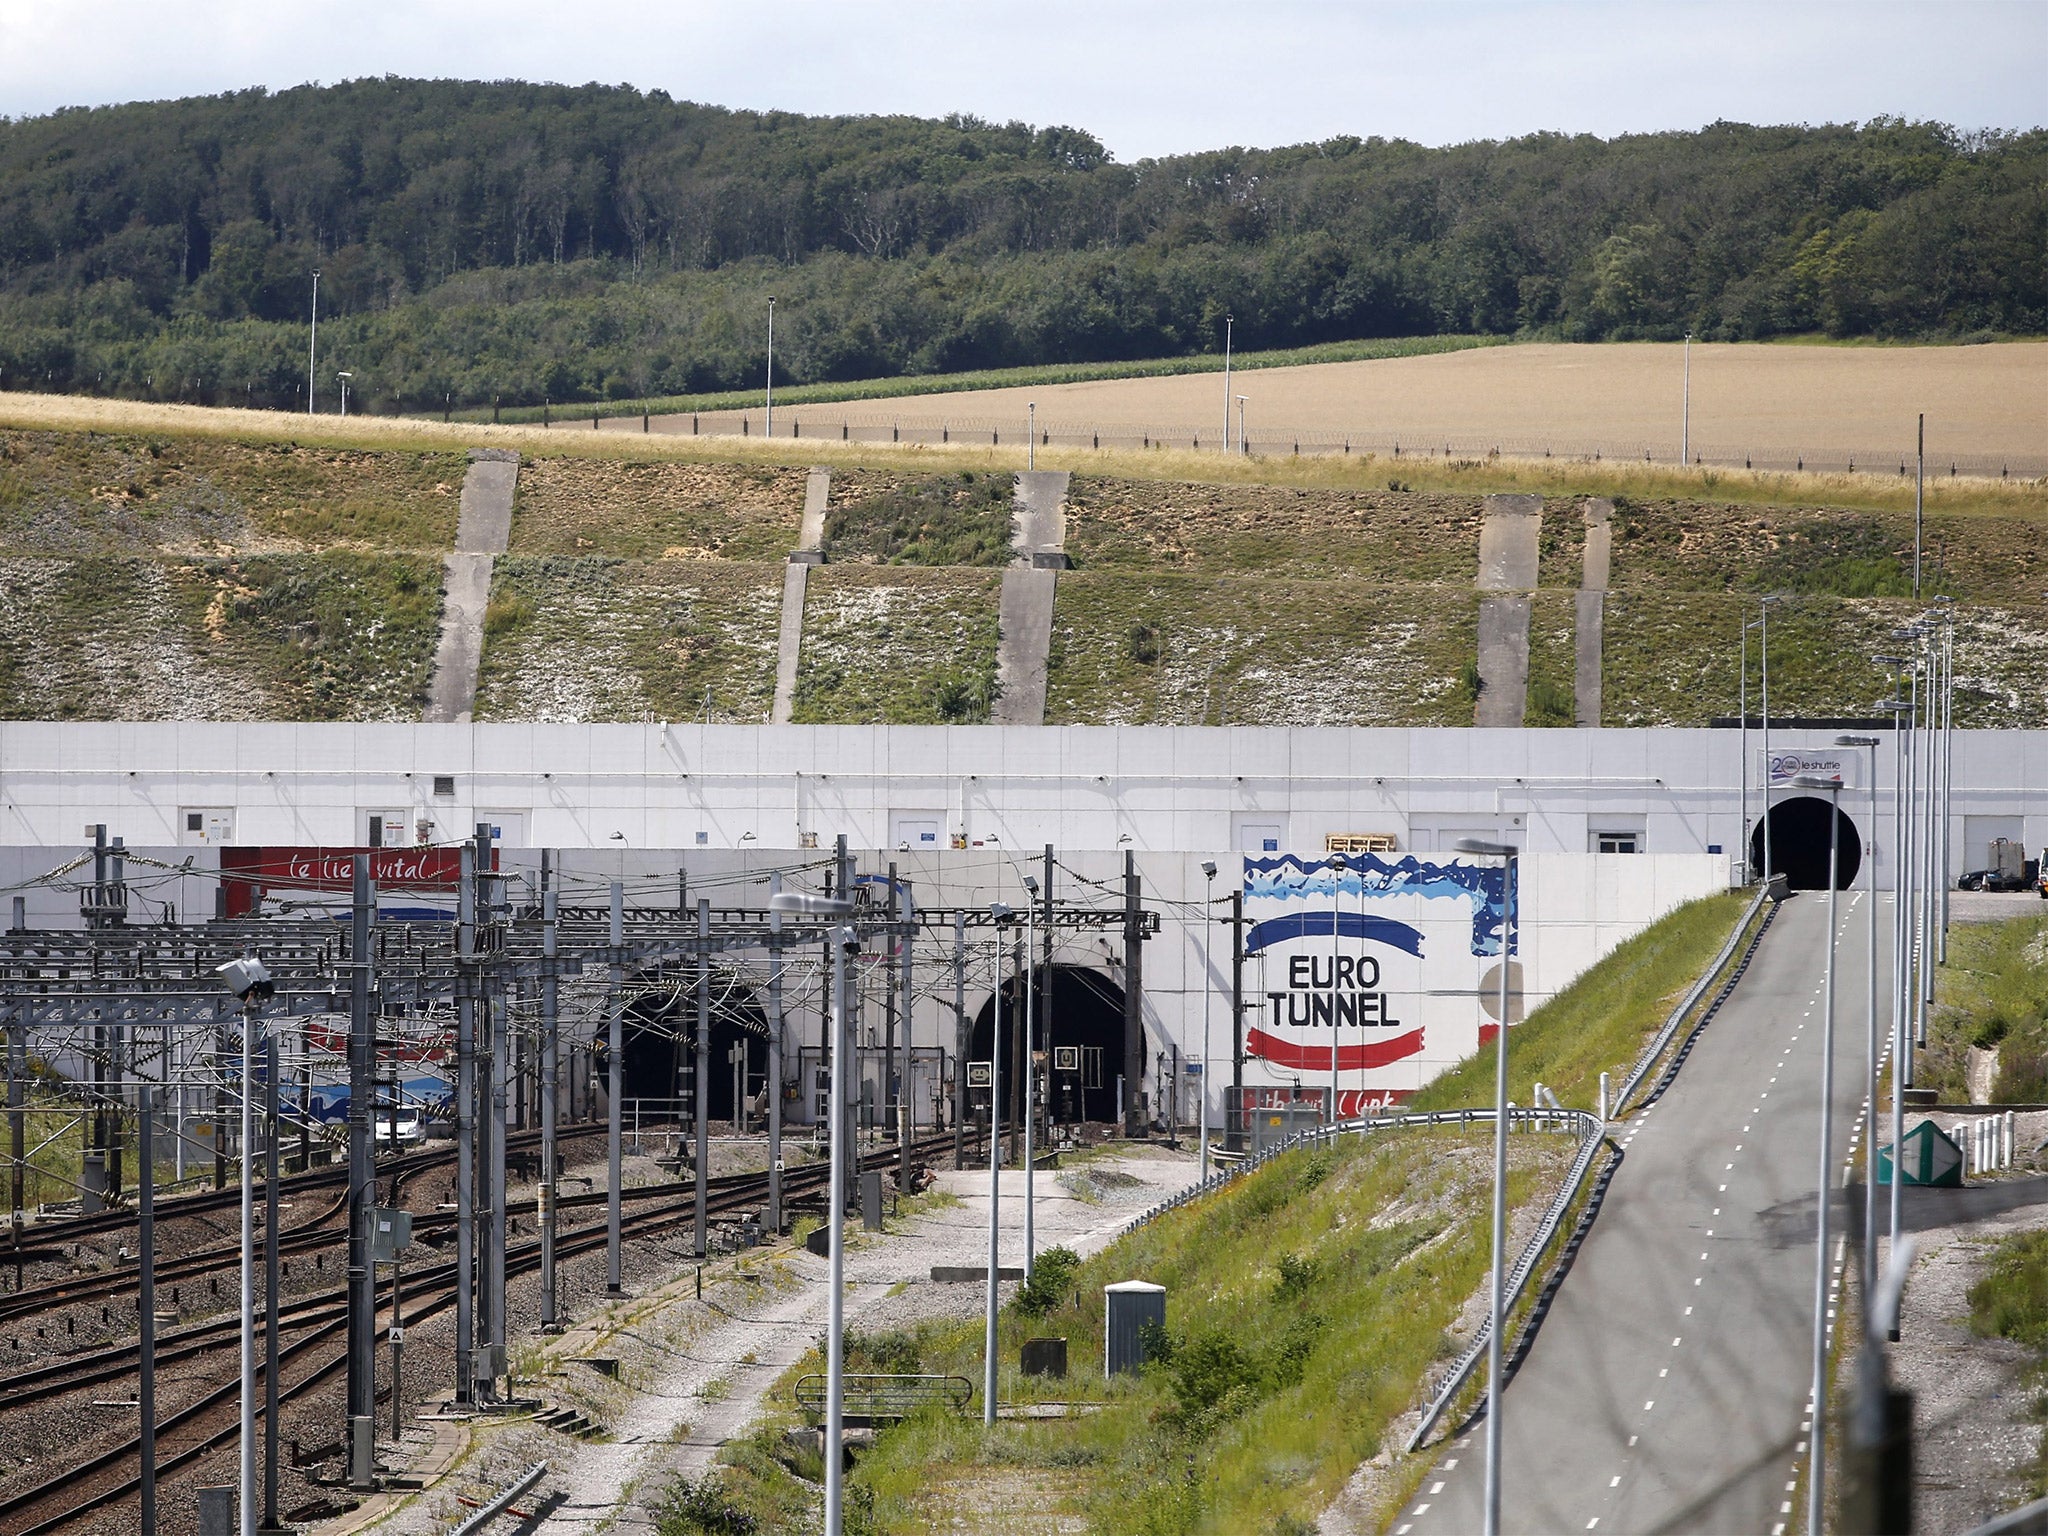 The entrance of the channel tunnel in Coquelles, near Calais